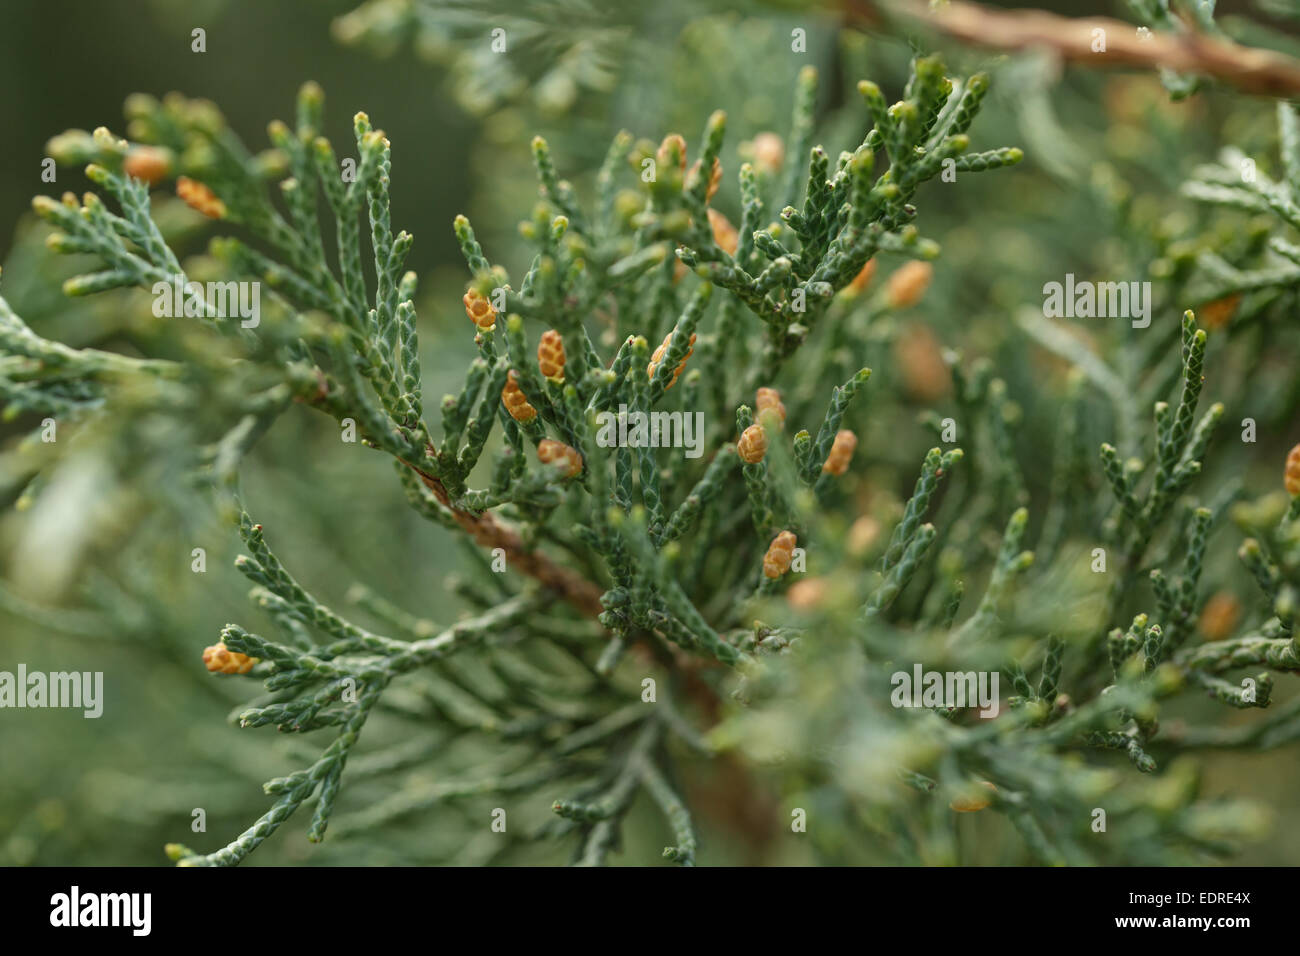 Juniper branch with yellow male cones, close up photo Stock Photo